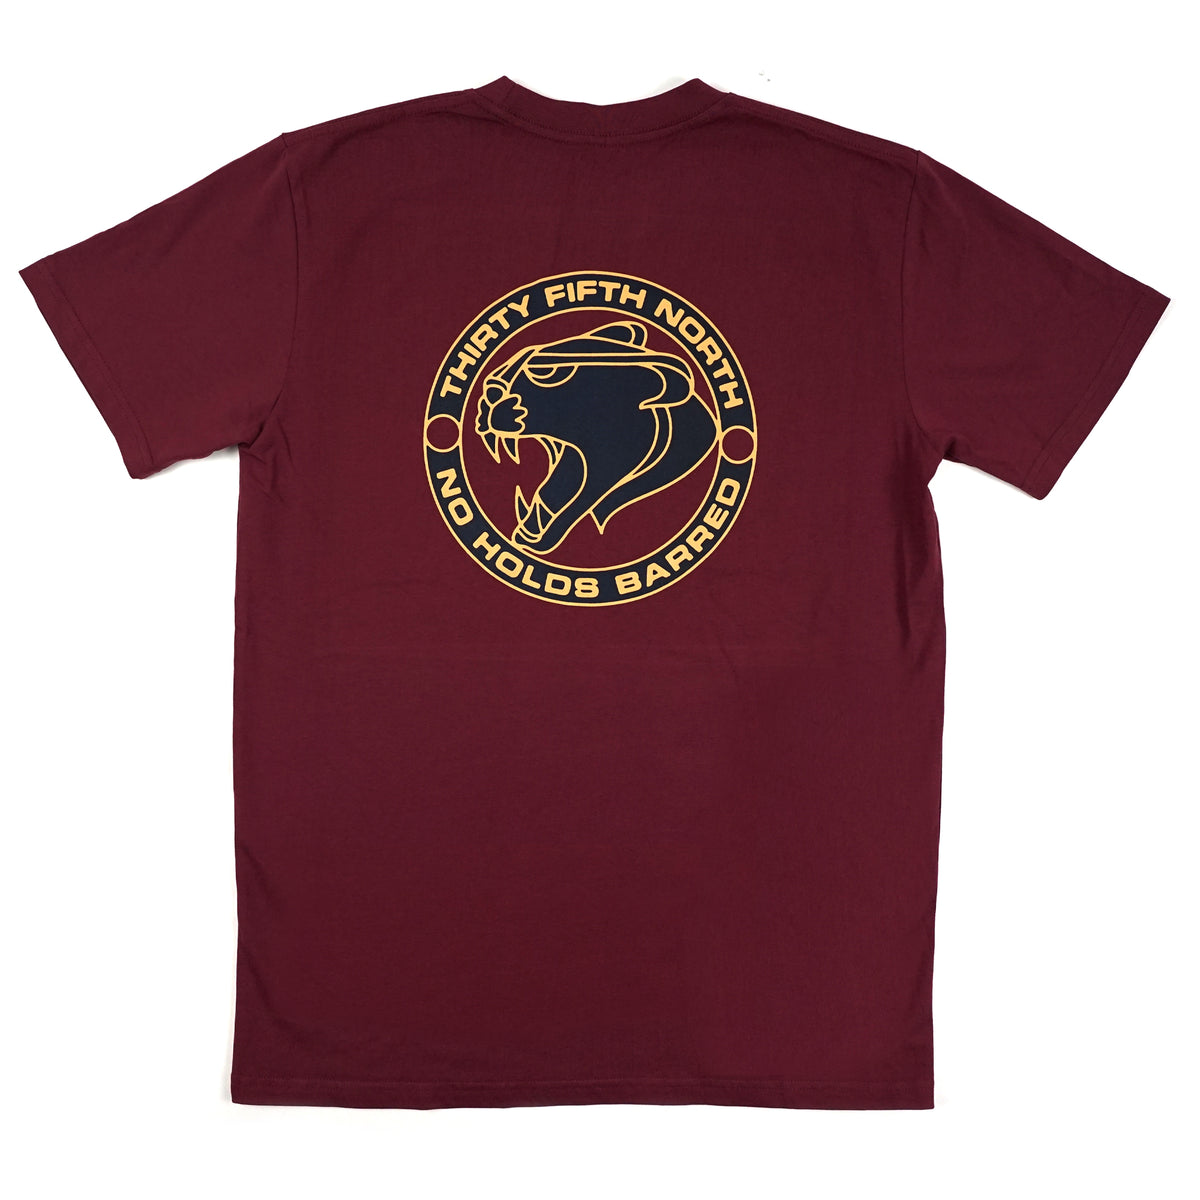 35th North ‘No Holds Barred’ T-Shirt - Maroon